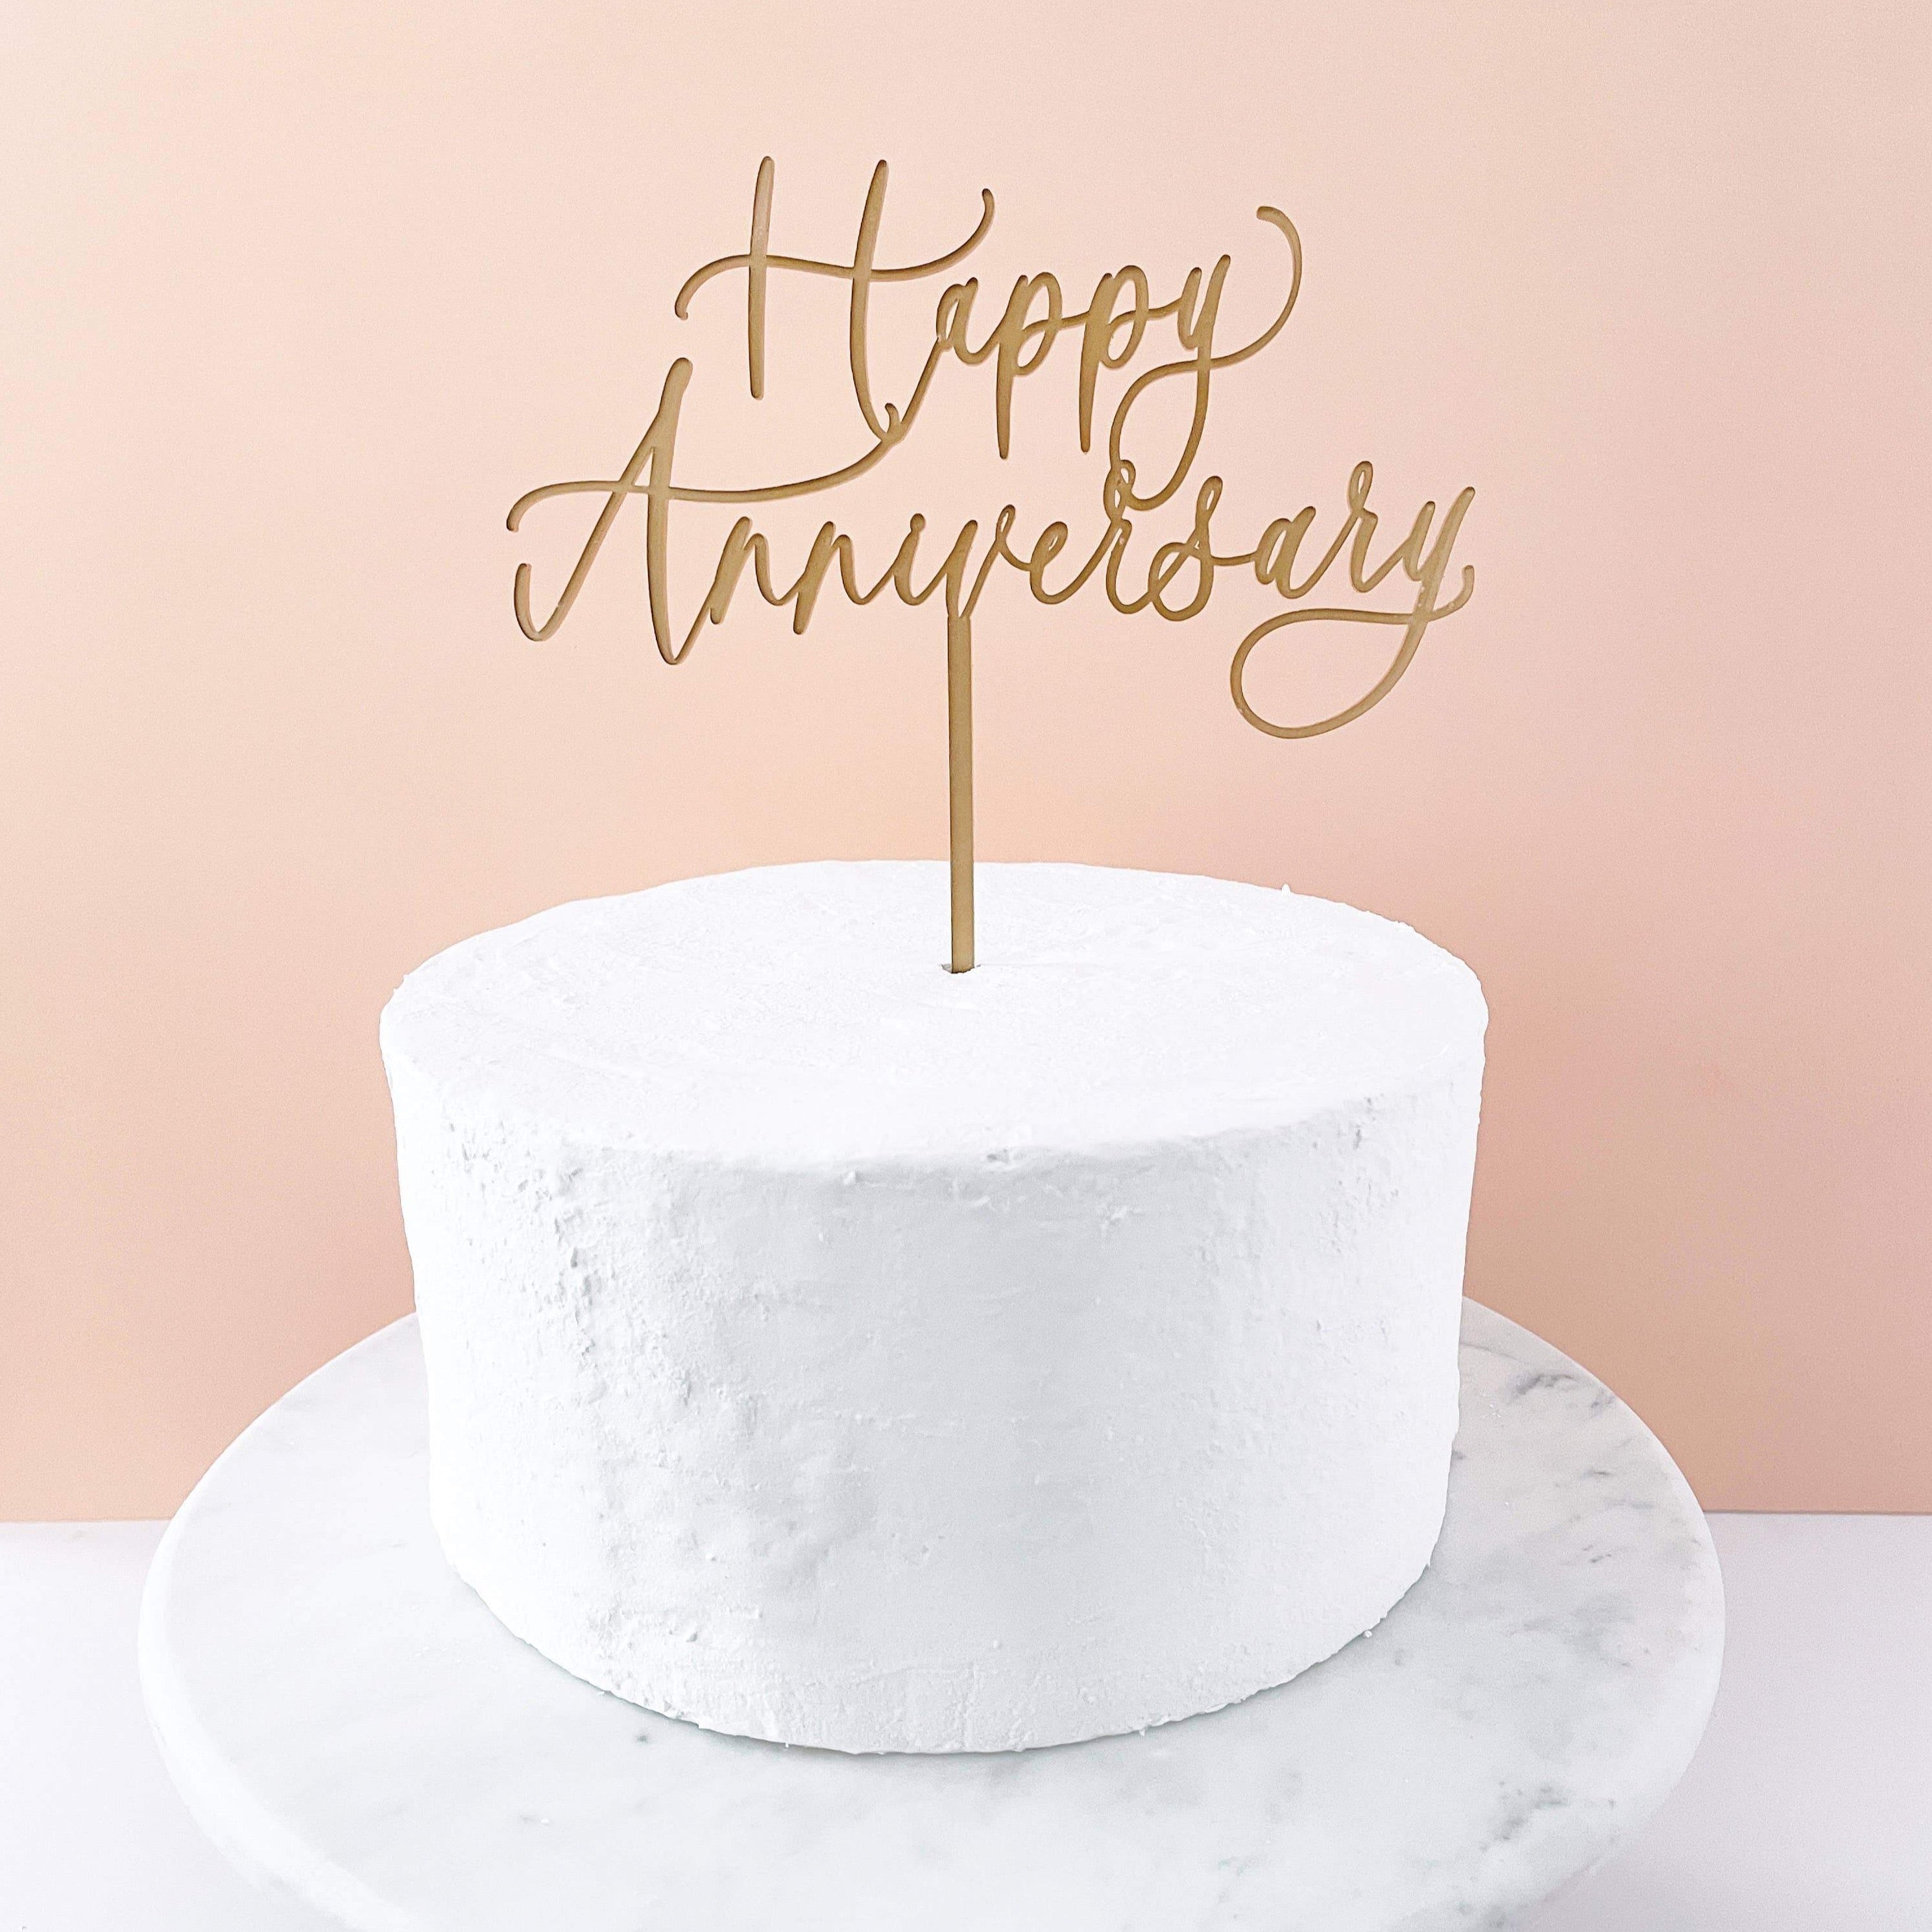 Happy Anniversary Round Cake 20027 | Hy-Vee Aisles Online Grocery Shopping